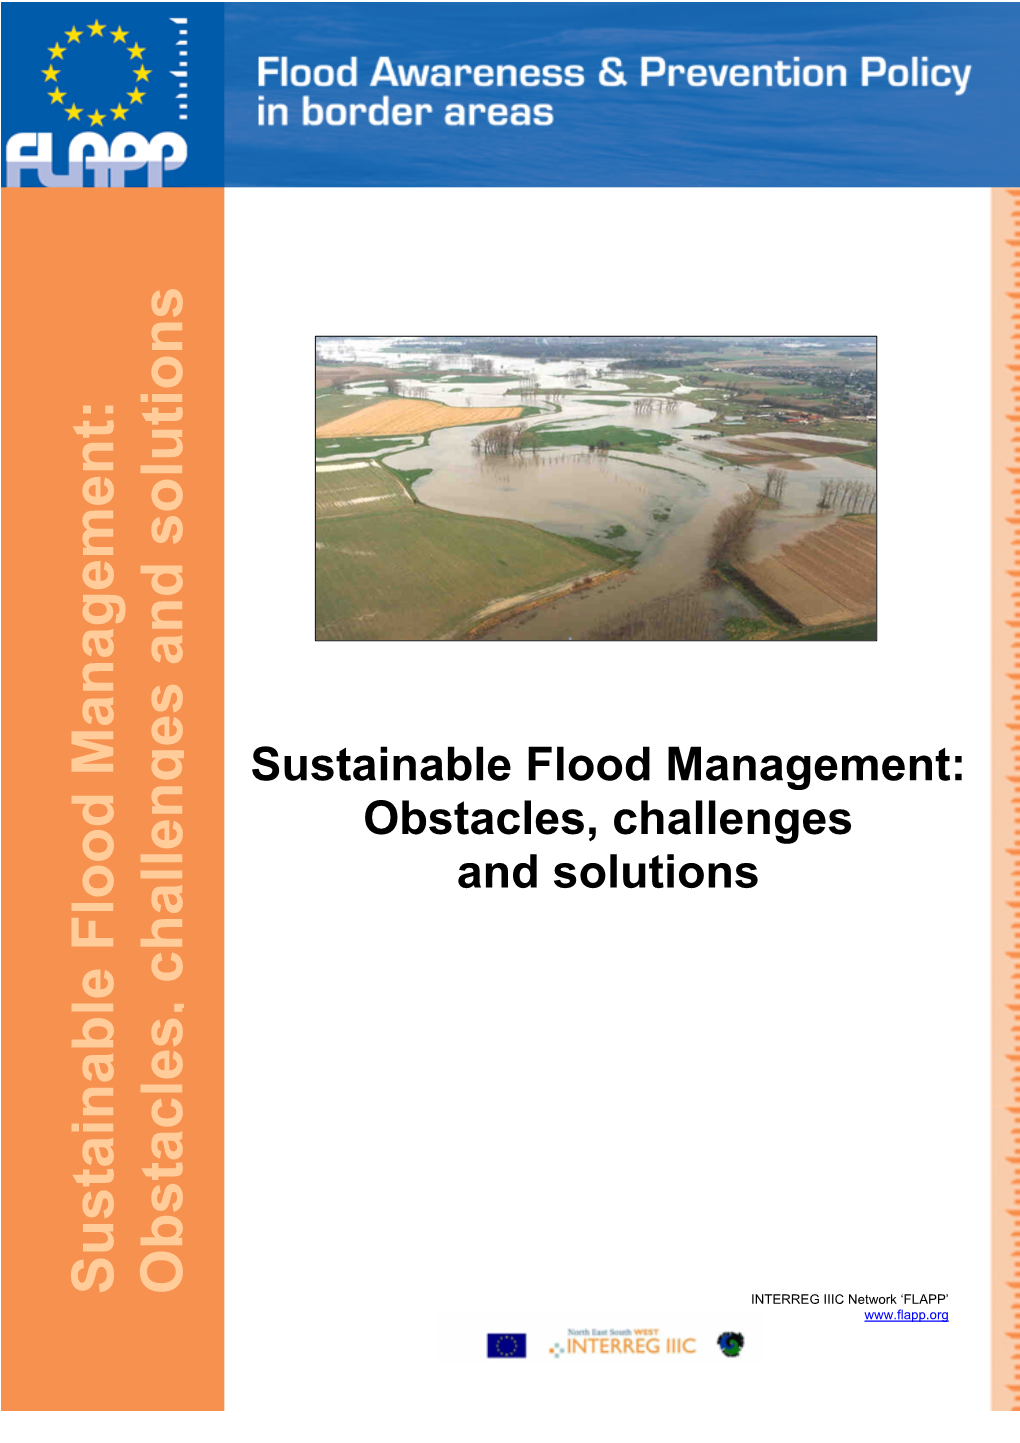 Sustainable Flood Management: Obstacles, Challenges and Solutions